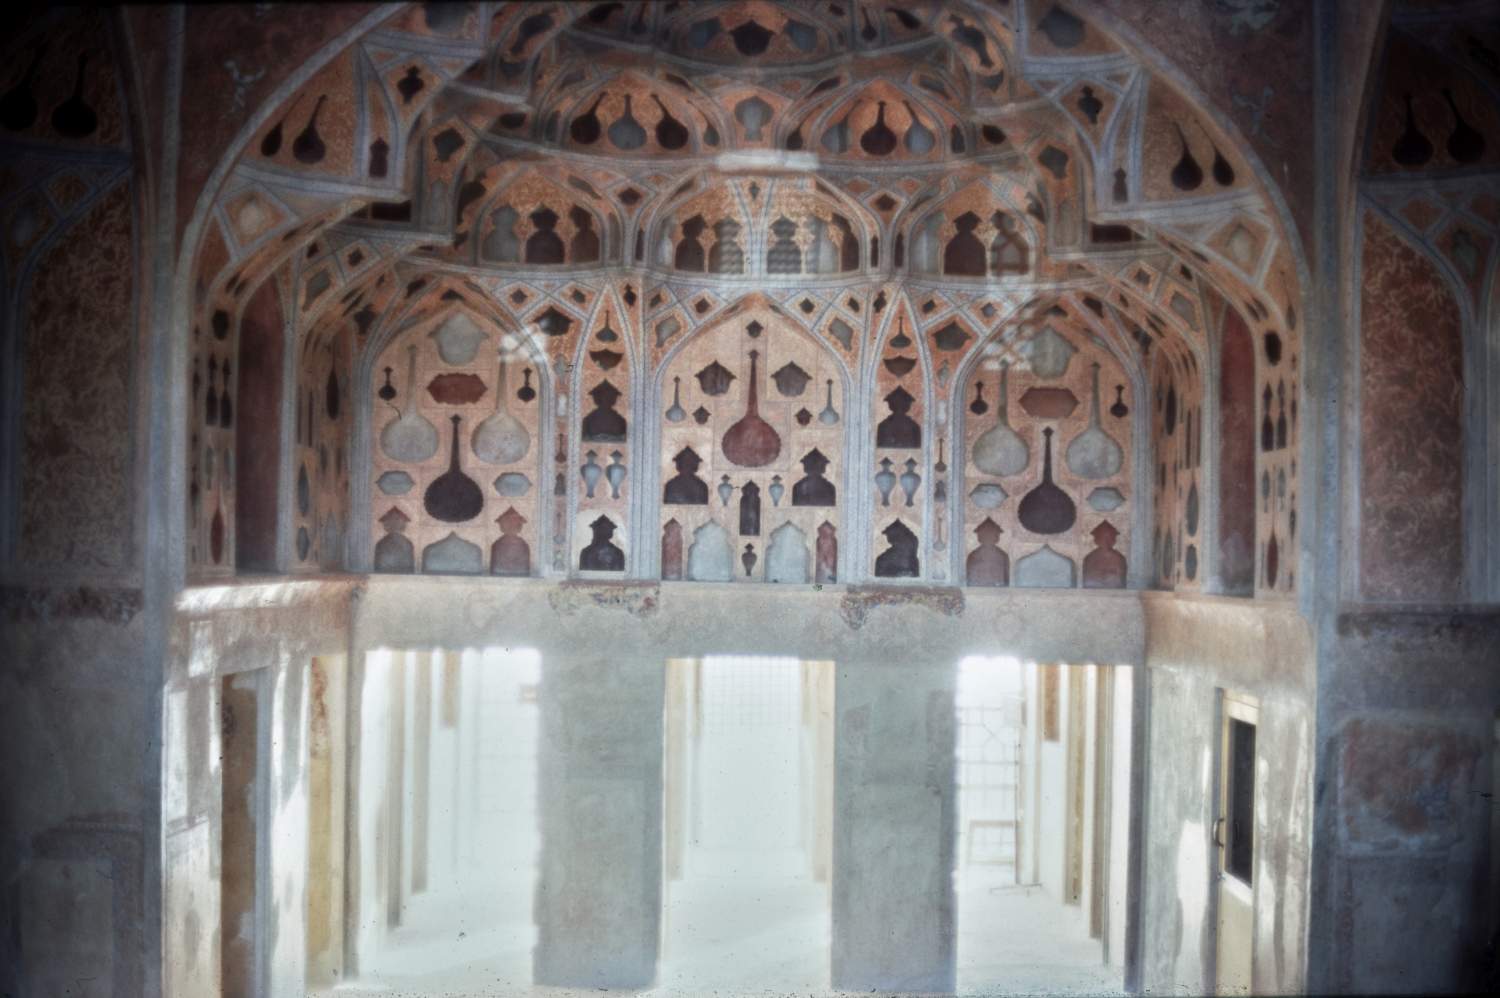 Fifth floor "music room," view toward windows showing muqarnas vaults with perforations in shape of vessels and instruments.